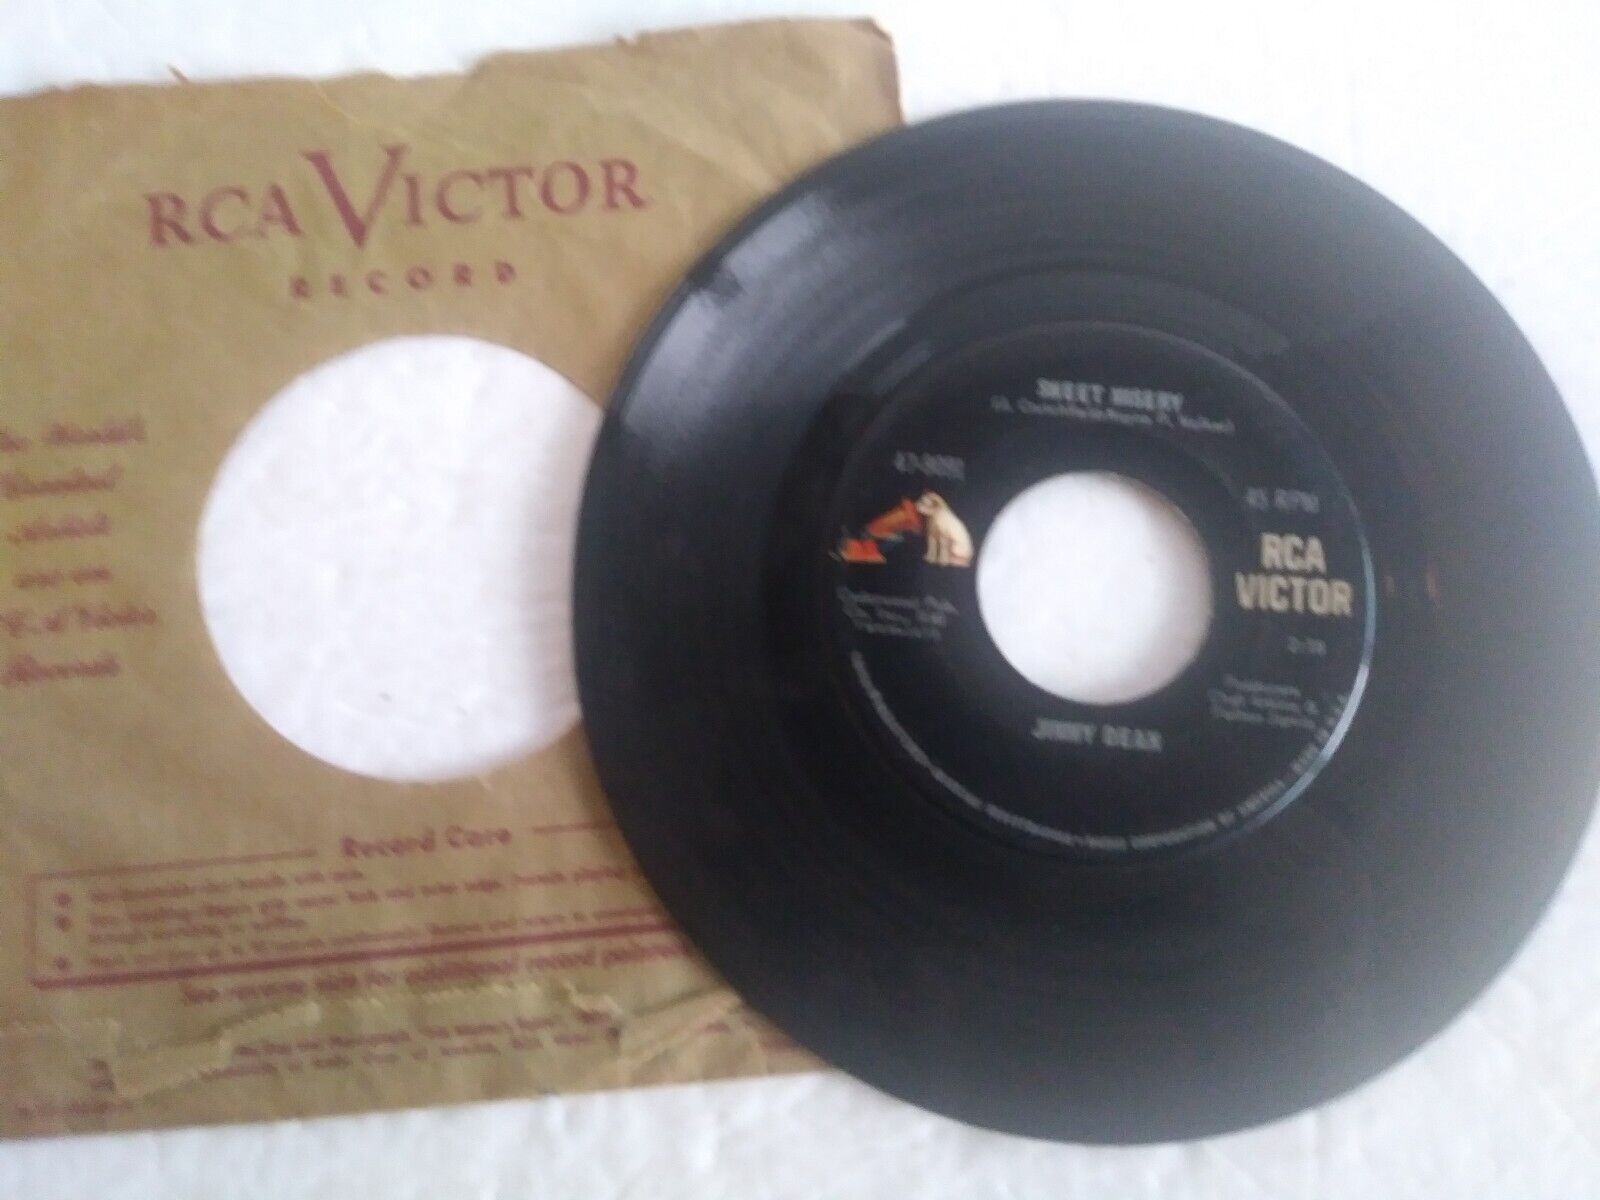 JIMMY DEAN--45 RPM RCA VICTOR RECORDS IN RCA SLEEVE--